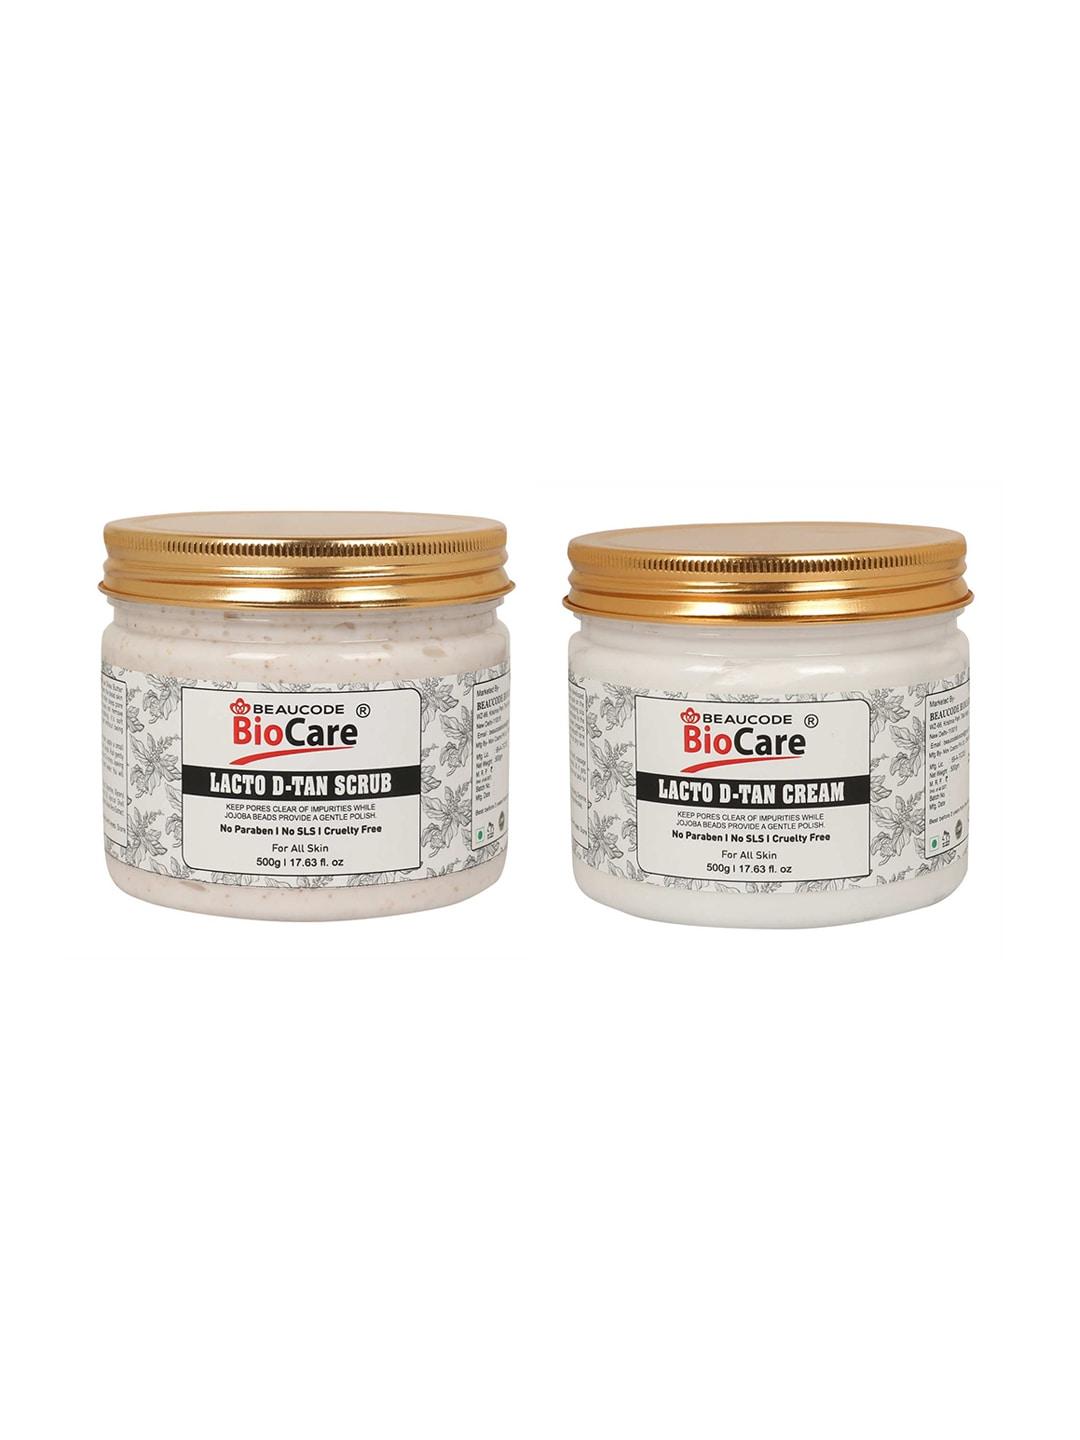 beaucode-biocare-set-of-2--lacto-d-tan-face-and-body-cream-and-scrub-1kg